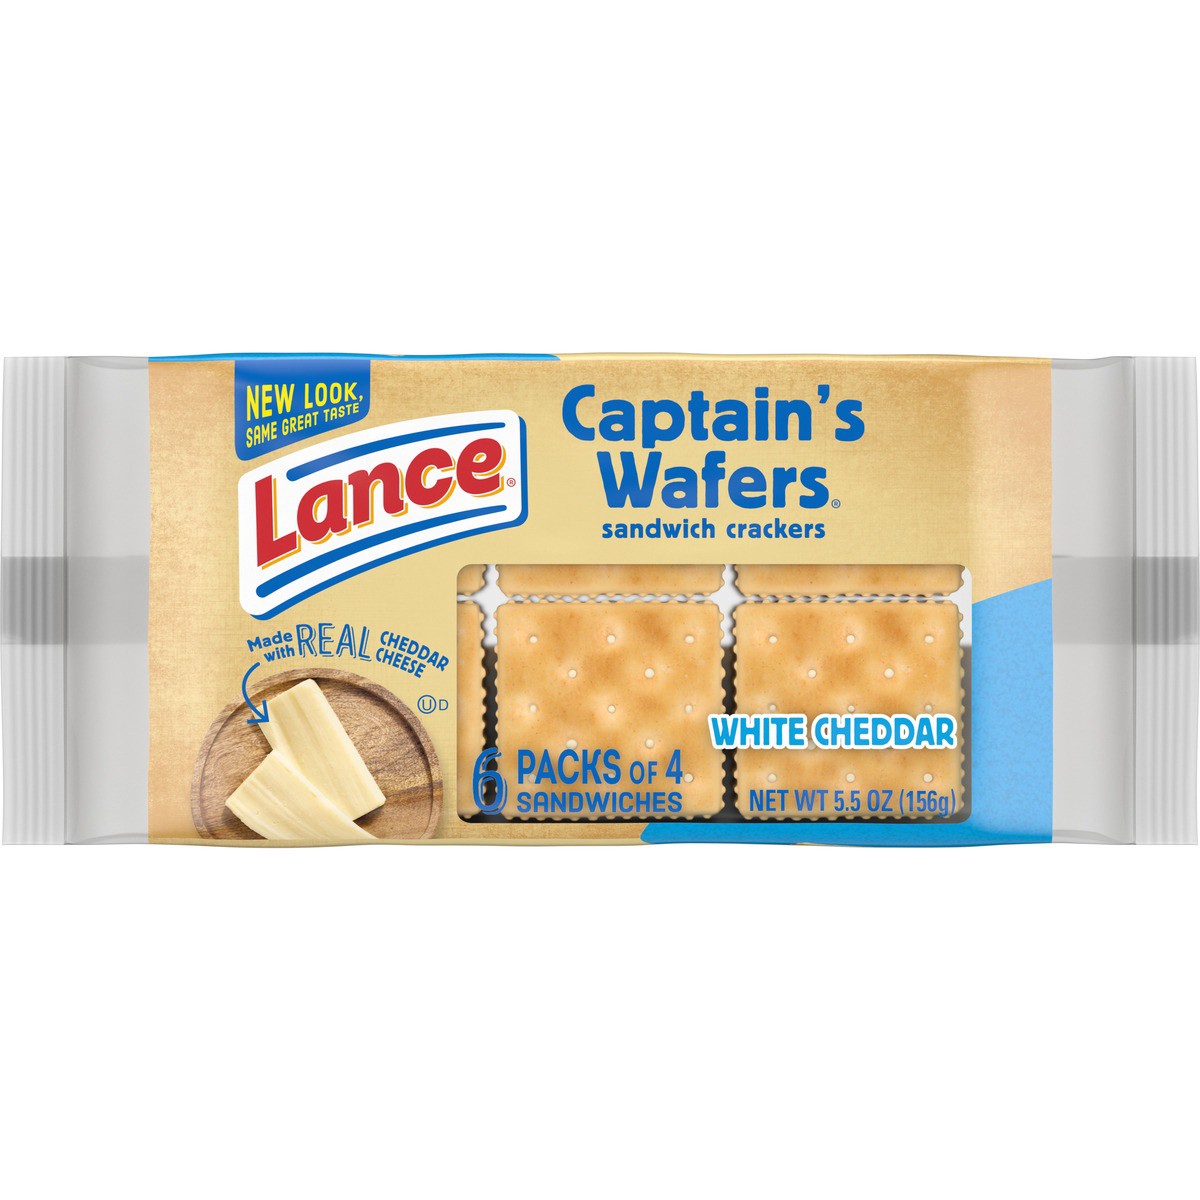 slide 1 of 5, Lance Sandwich Crackers, Captain's Wafers White Cheddar, 6 Packs, 4 Sandwiches Each, 5.5 oz